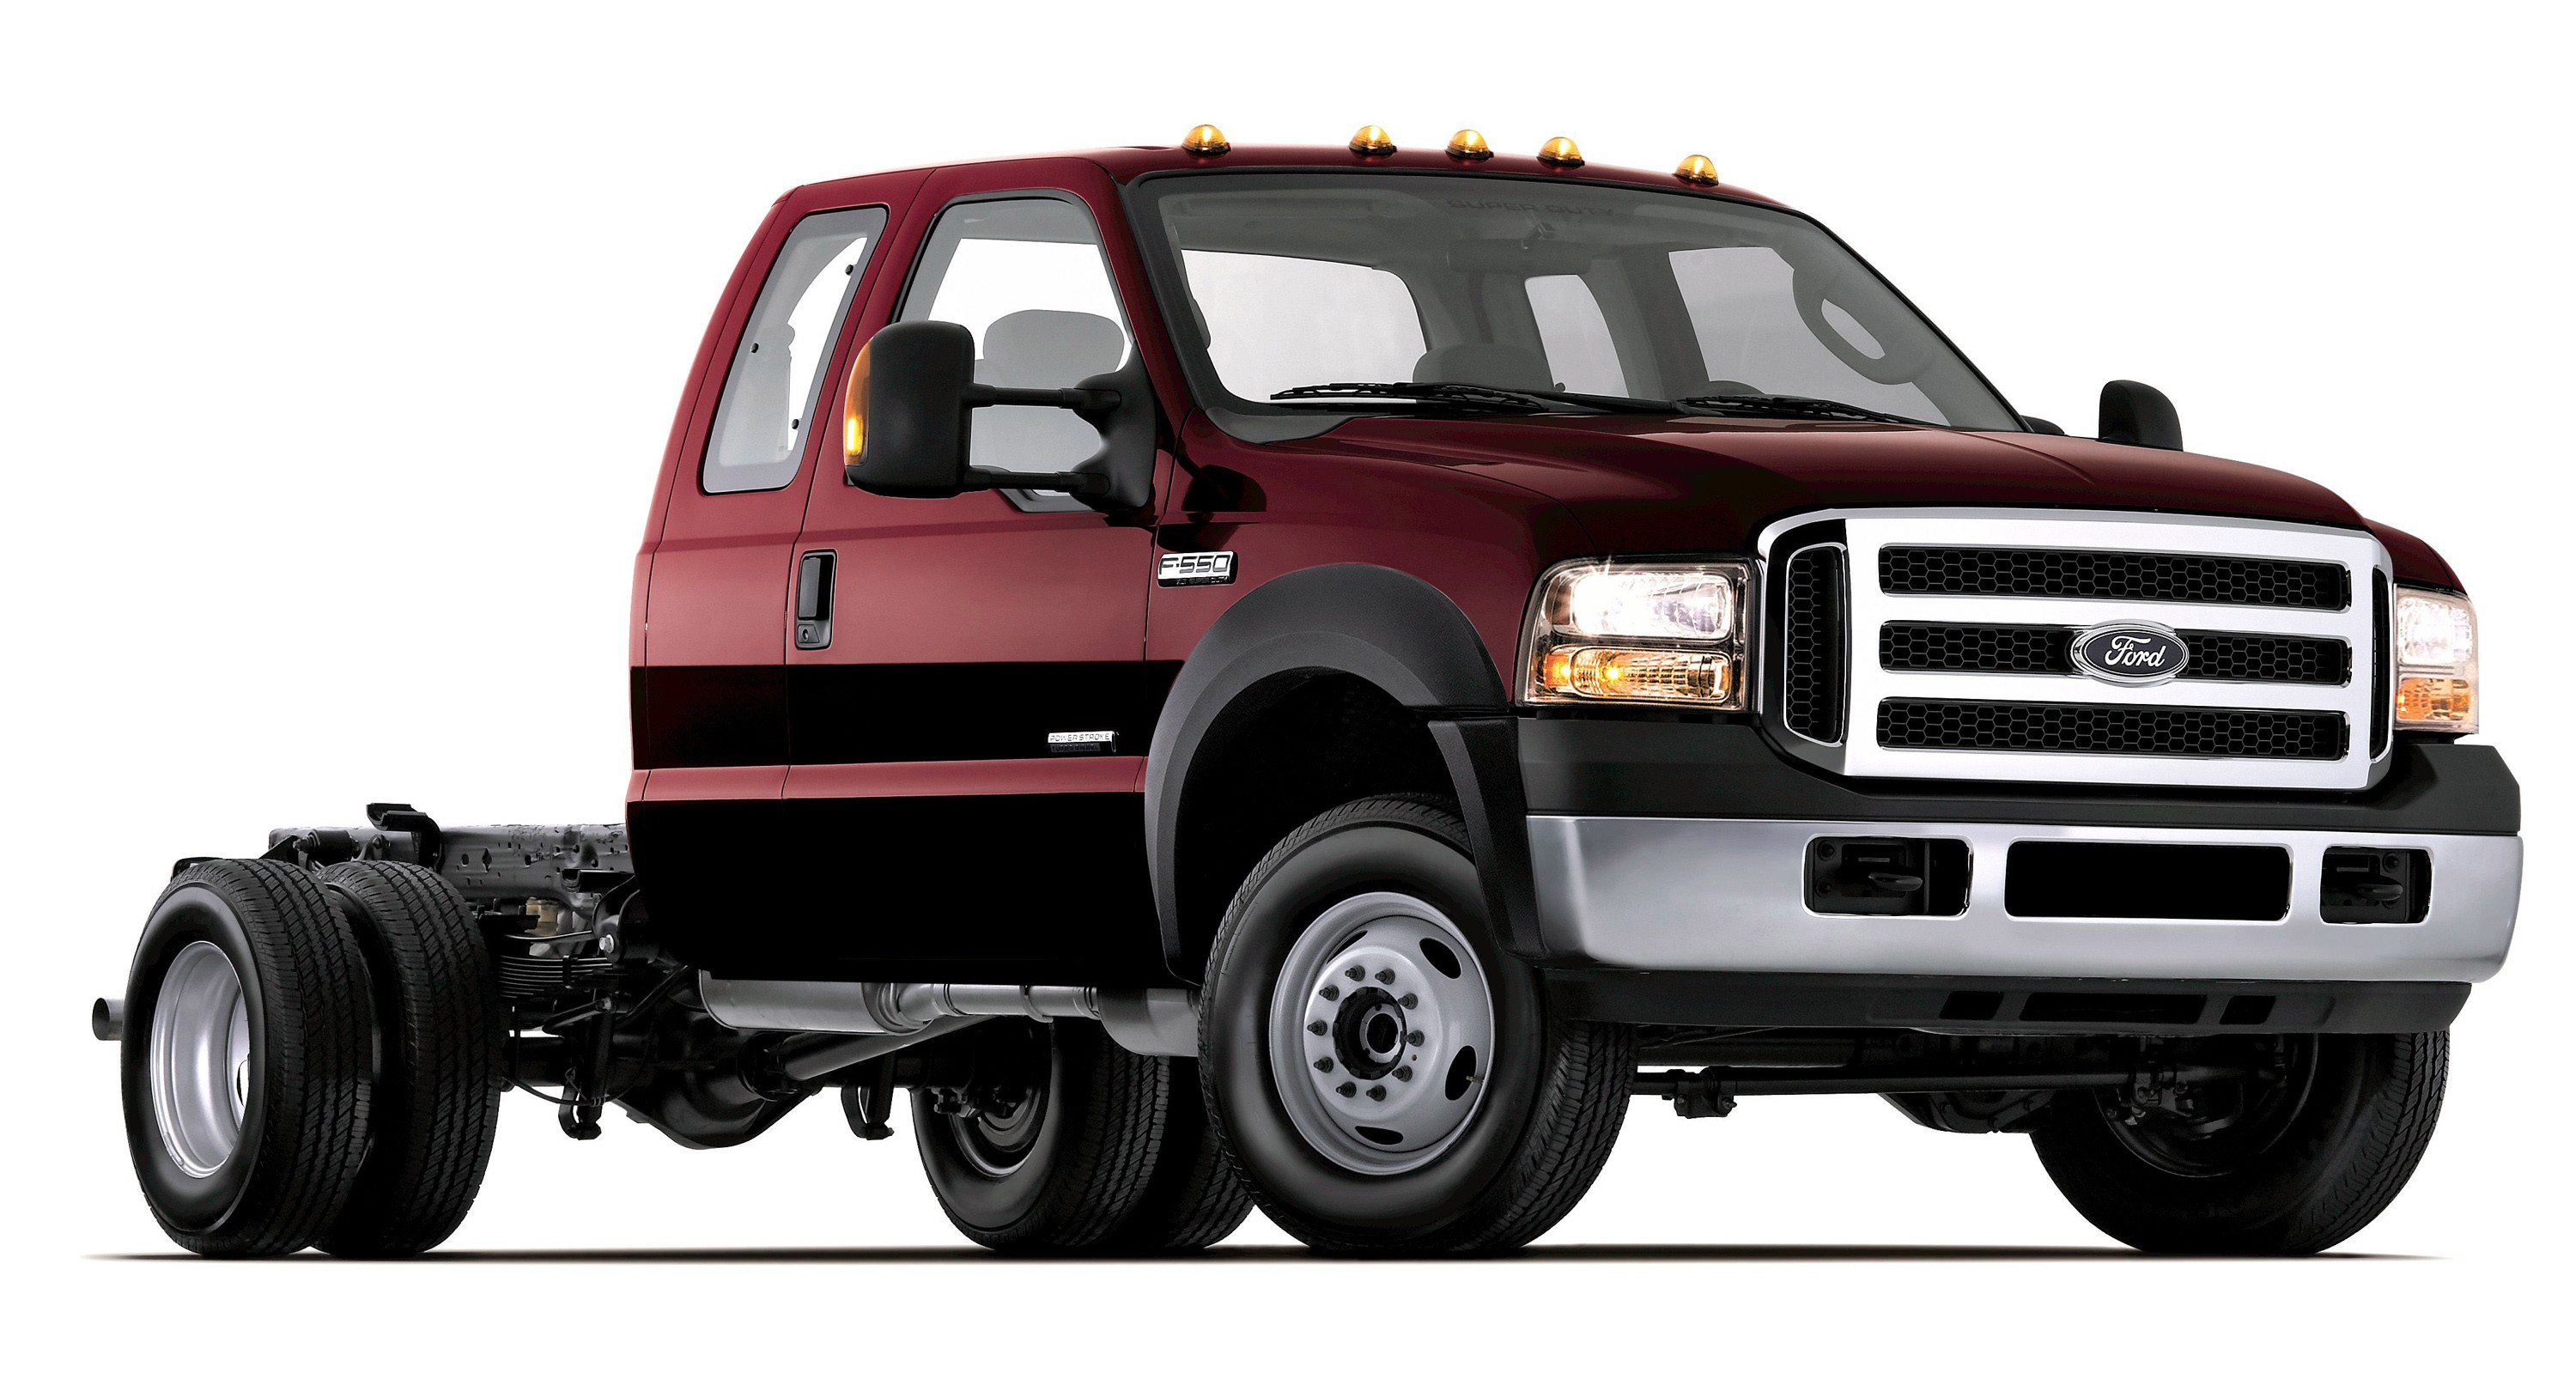 2007 FORD F-450